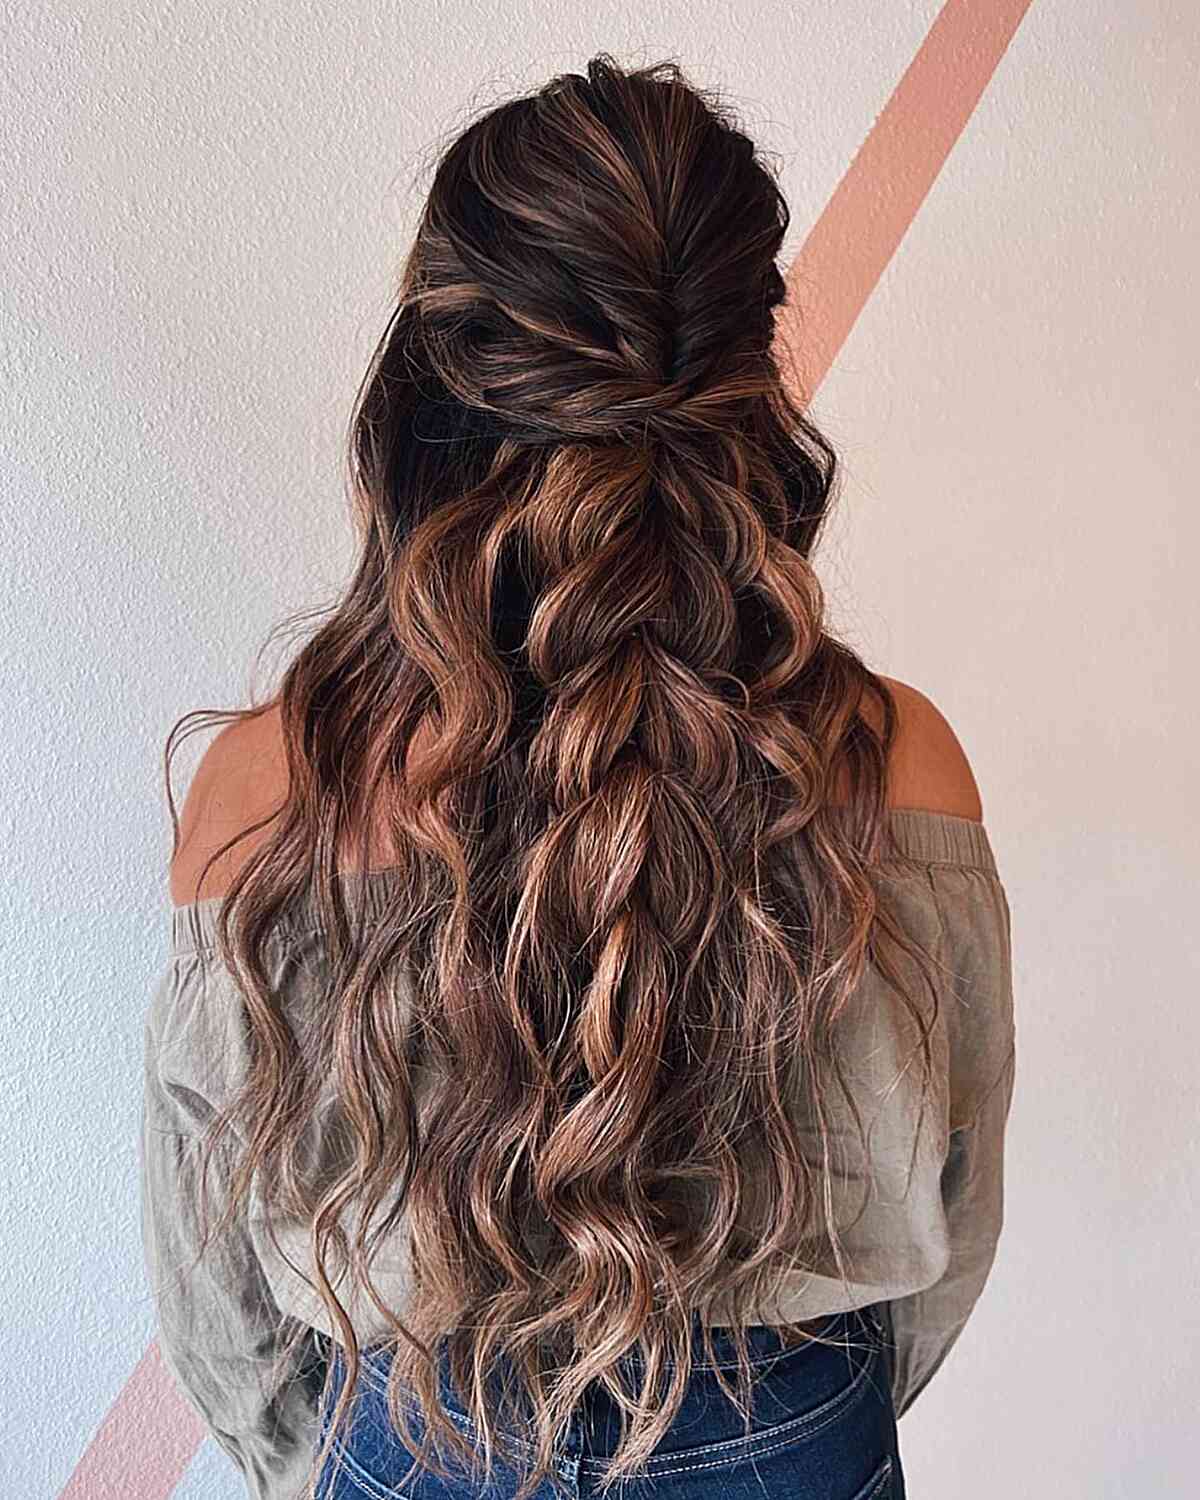 Details more than 124 boho hairstyles for short hair super hot